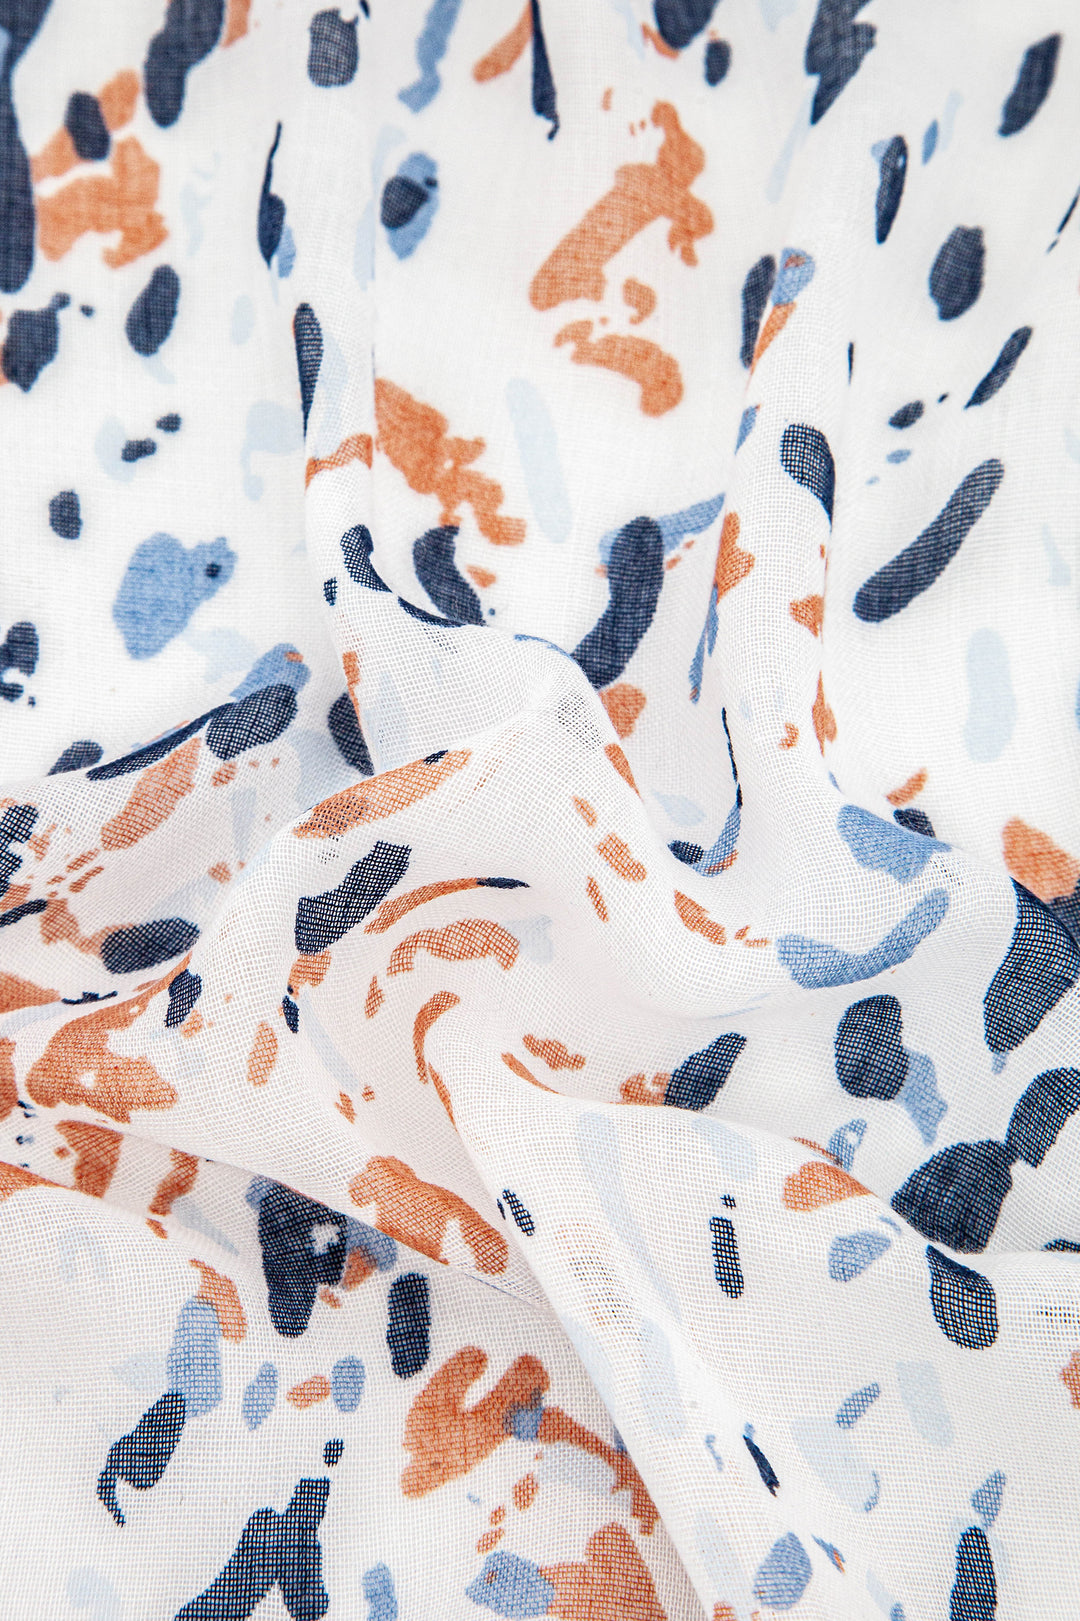 close up of the cream and navy blue abstract animal print pattern